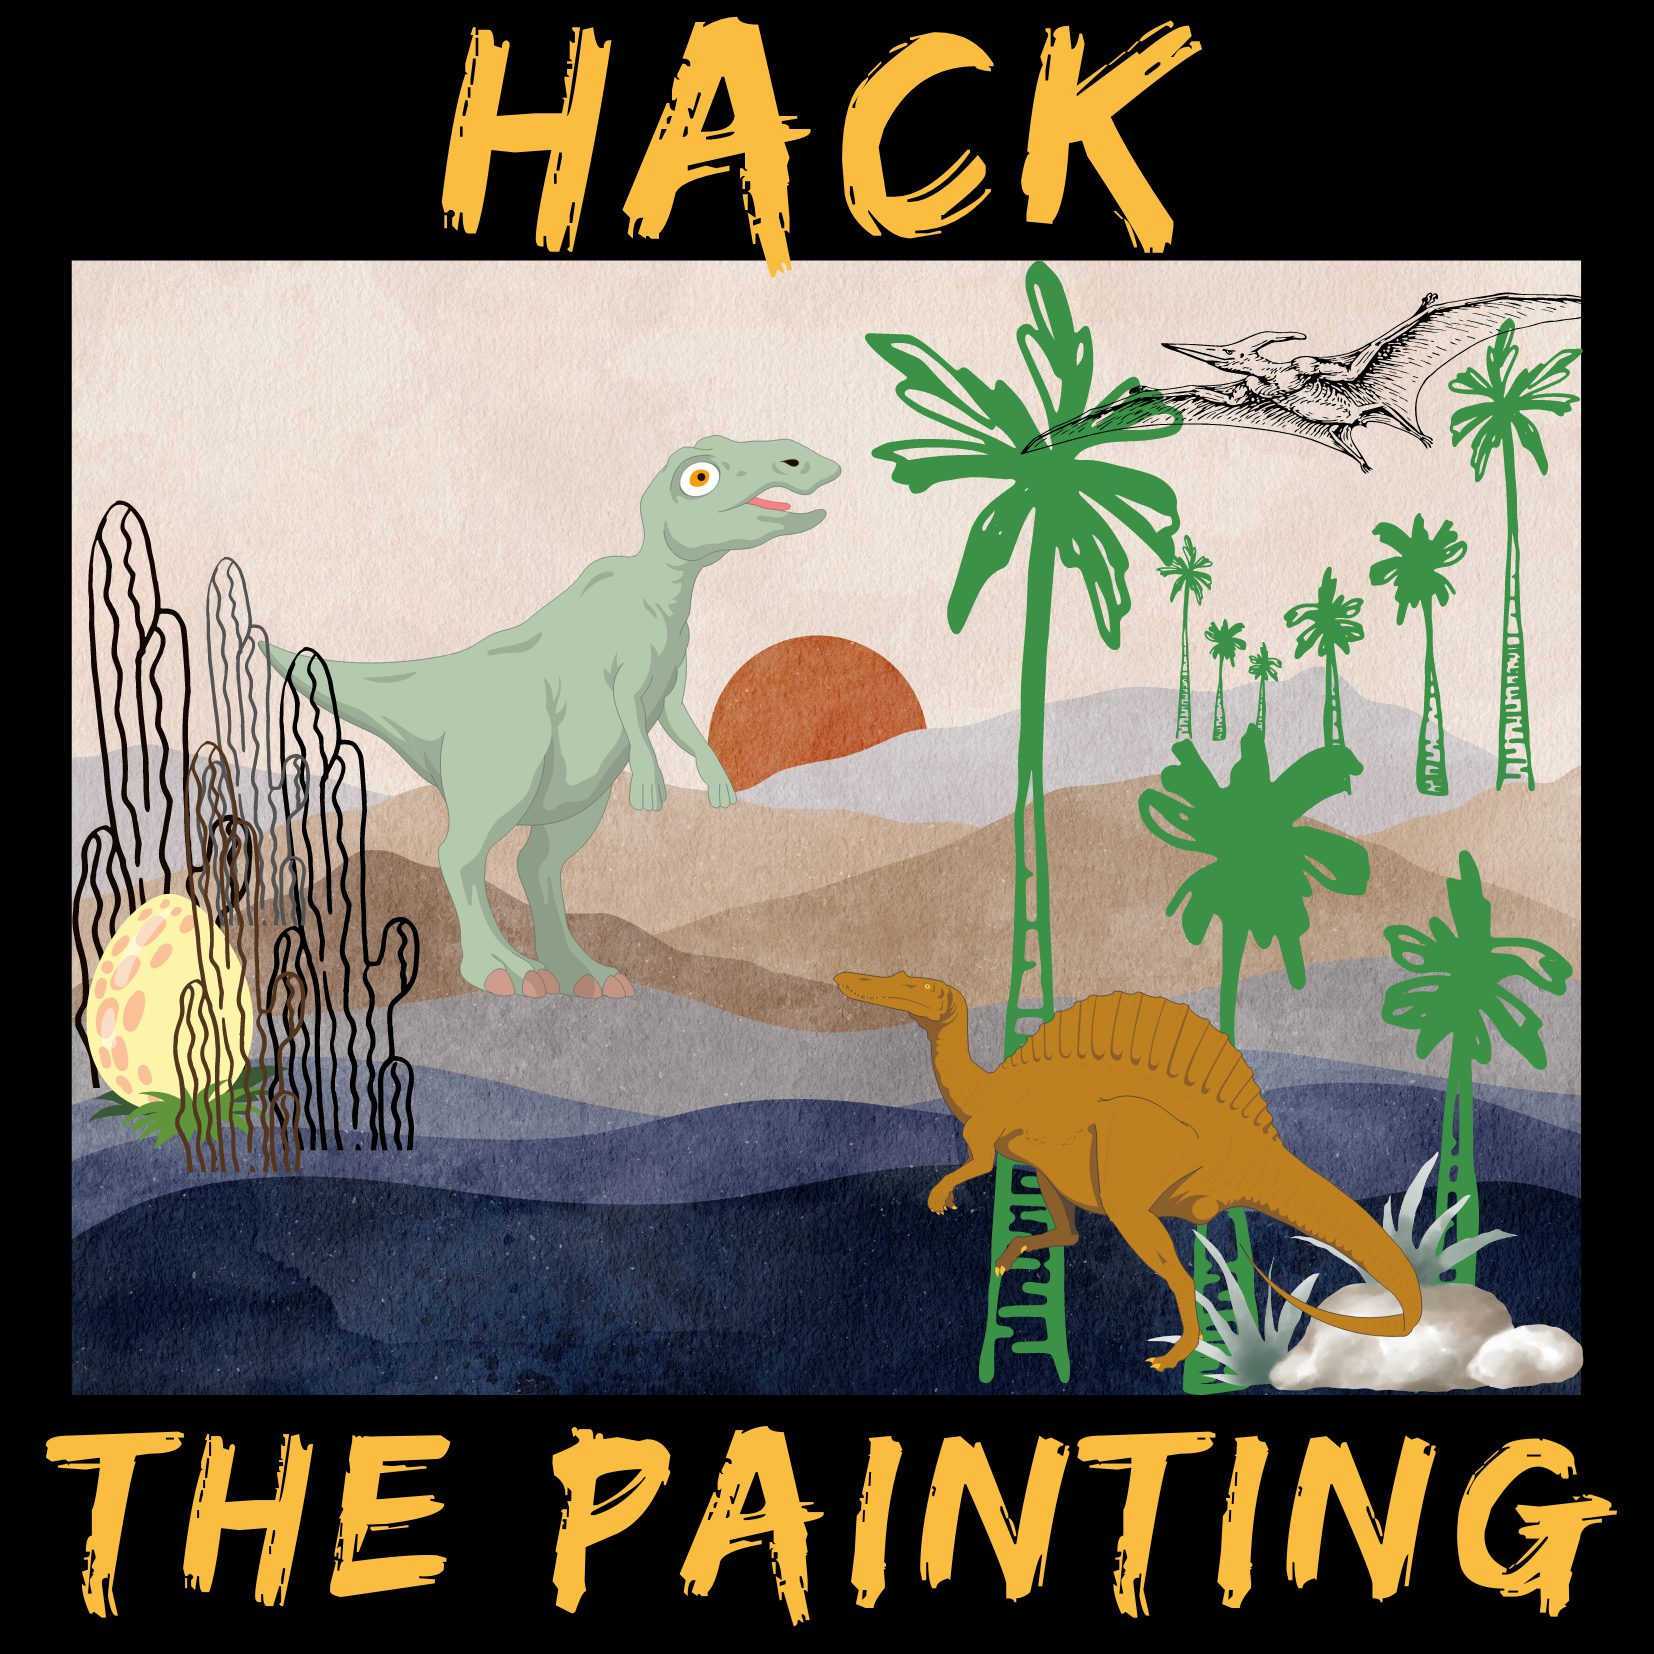 black background with a canvas painting of a desert sunset, added in art of cacti, dinosaurs, and trees, with orange words Hack the Painting